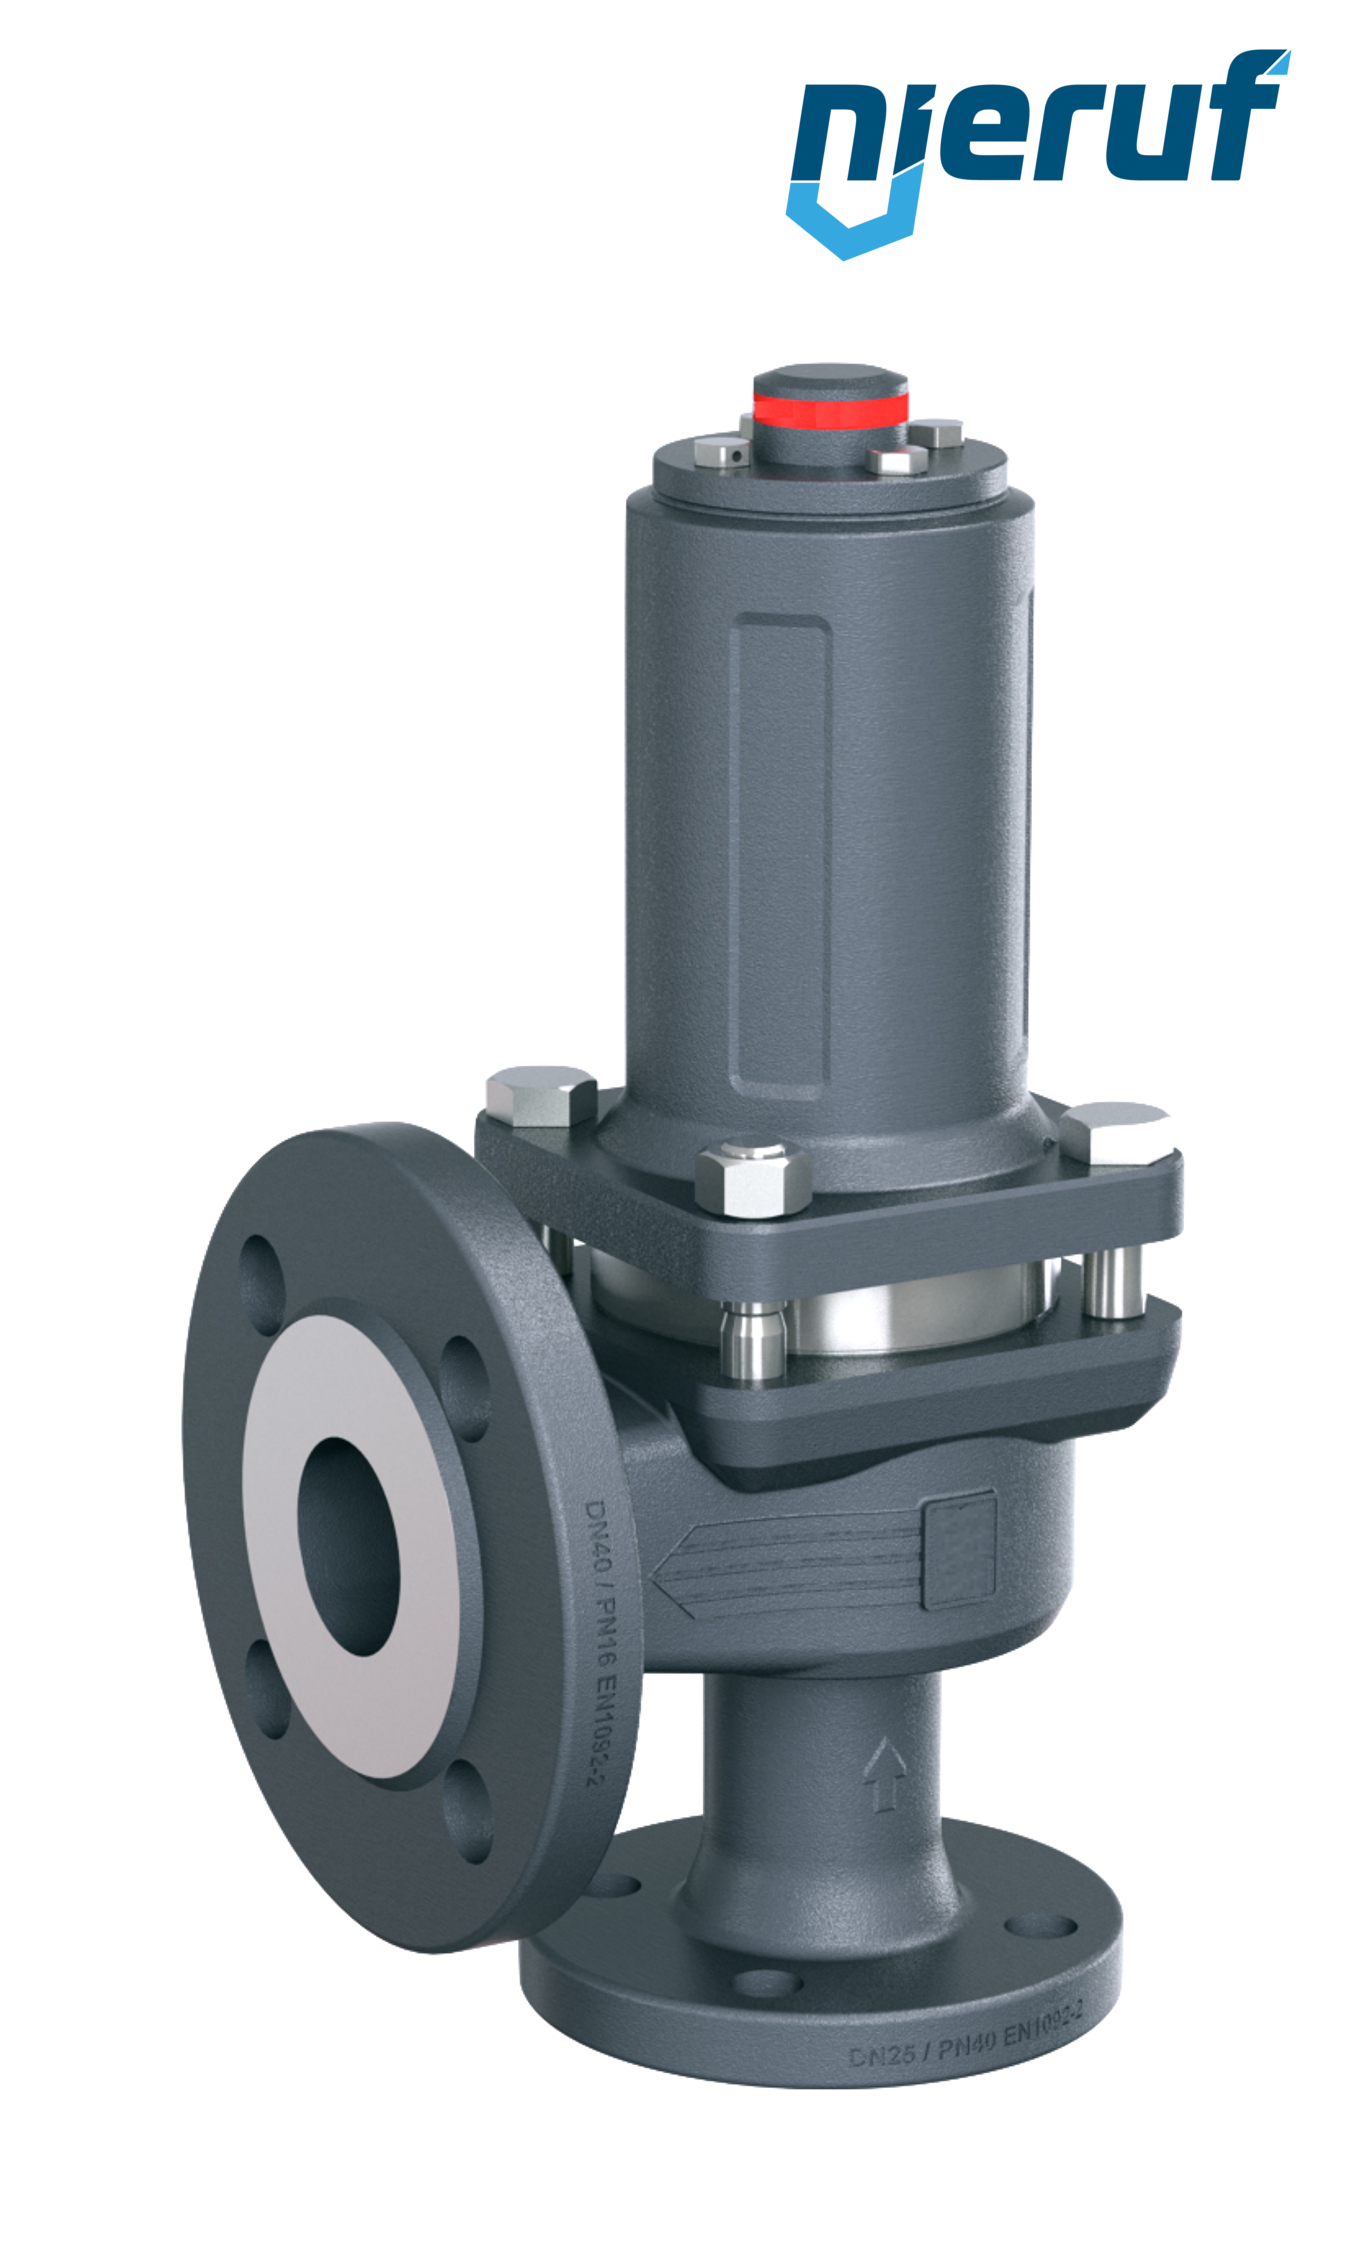 flange-safety valve DN32/DN50 SF06, gastight bonnet & stainless steel bonnet metal, without lifting device